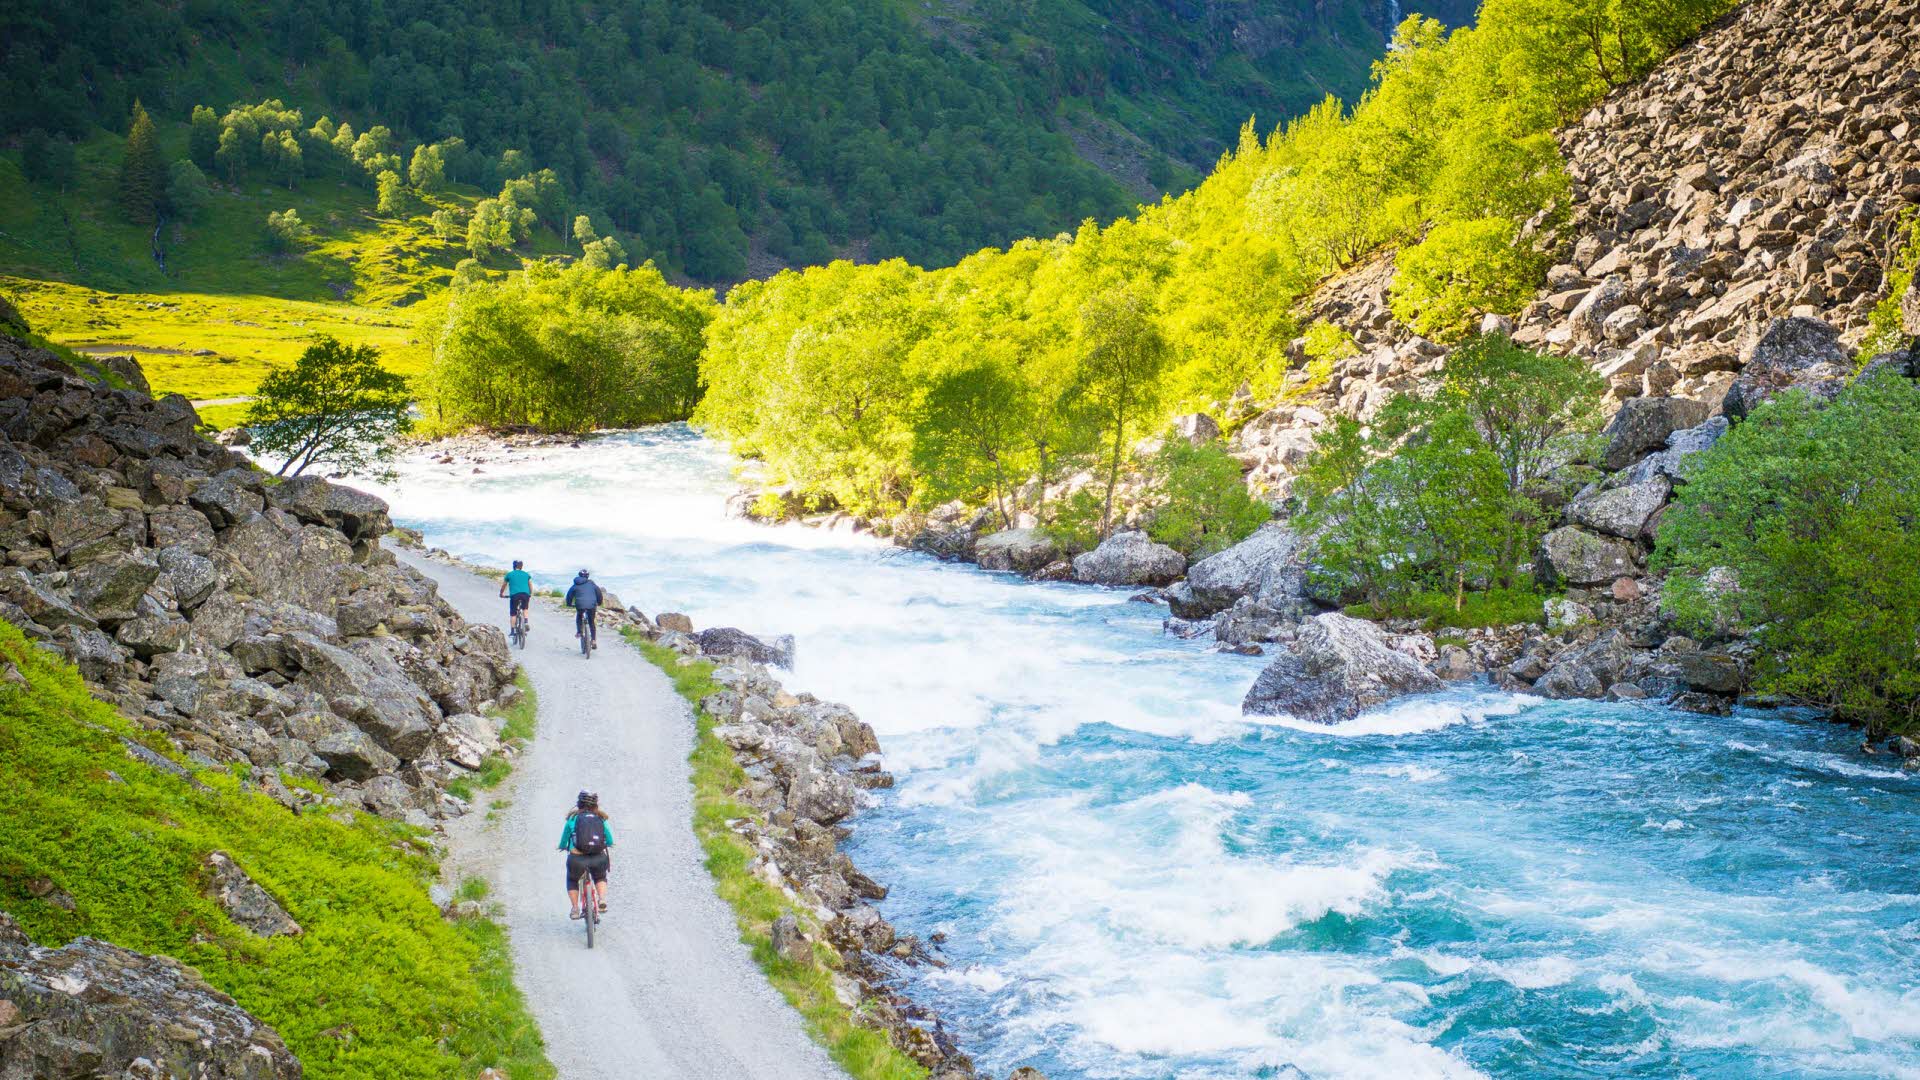 Two people cycling along the river down Flåmsdalen, with blue skies and green grass